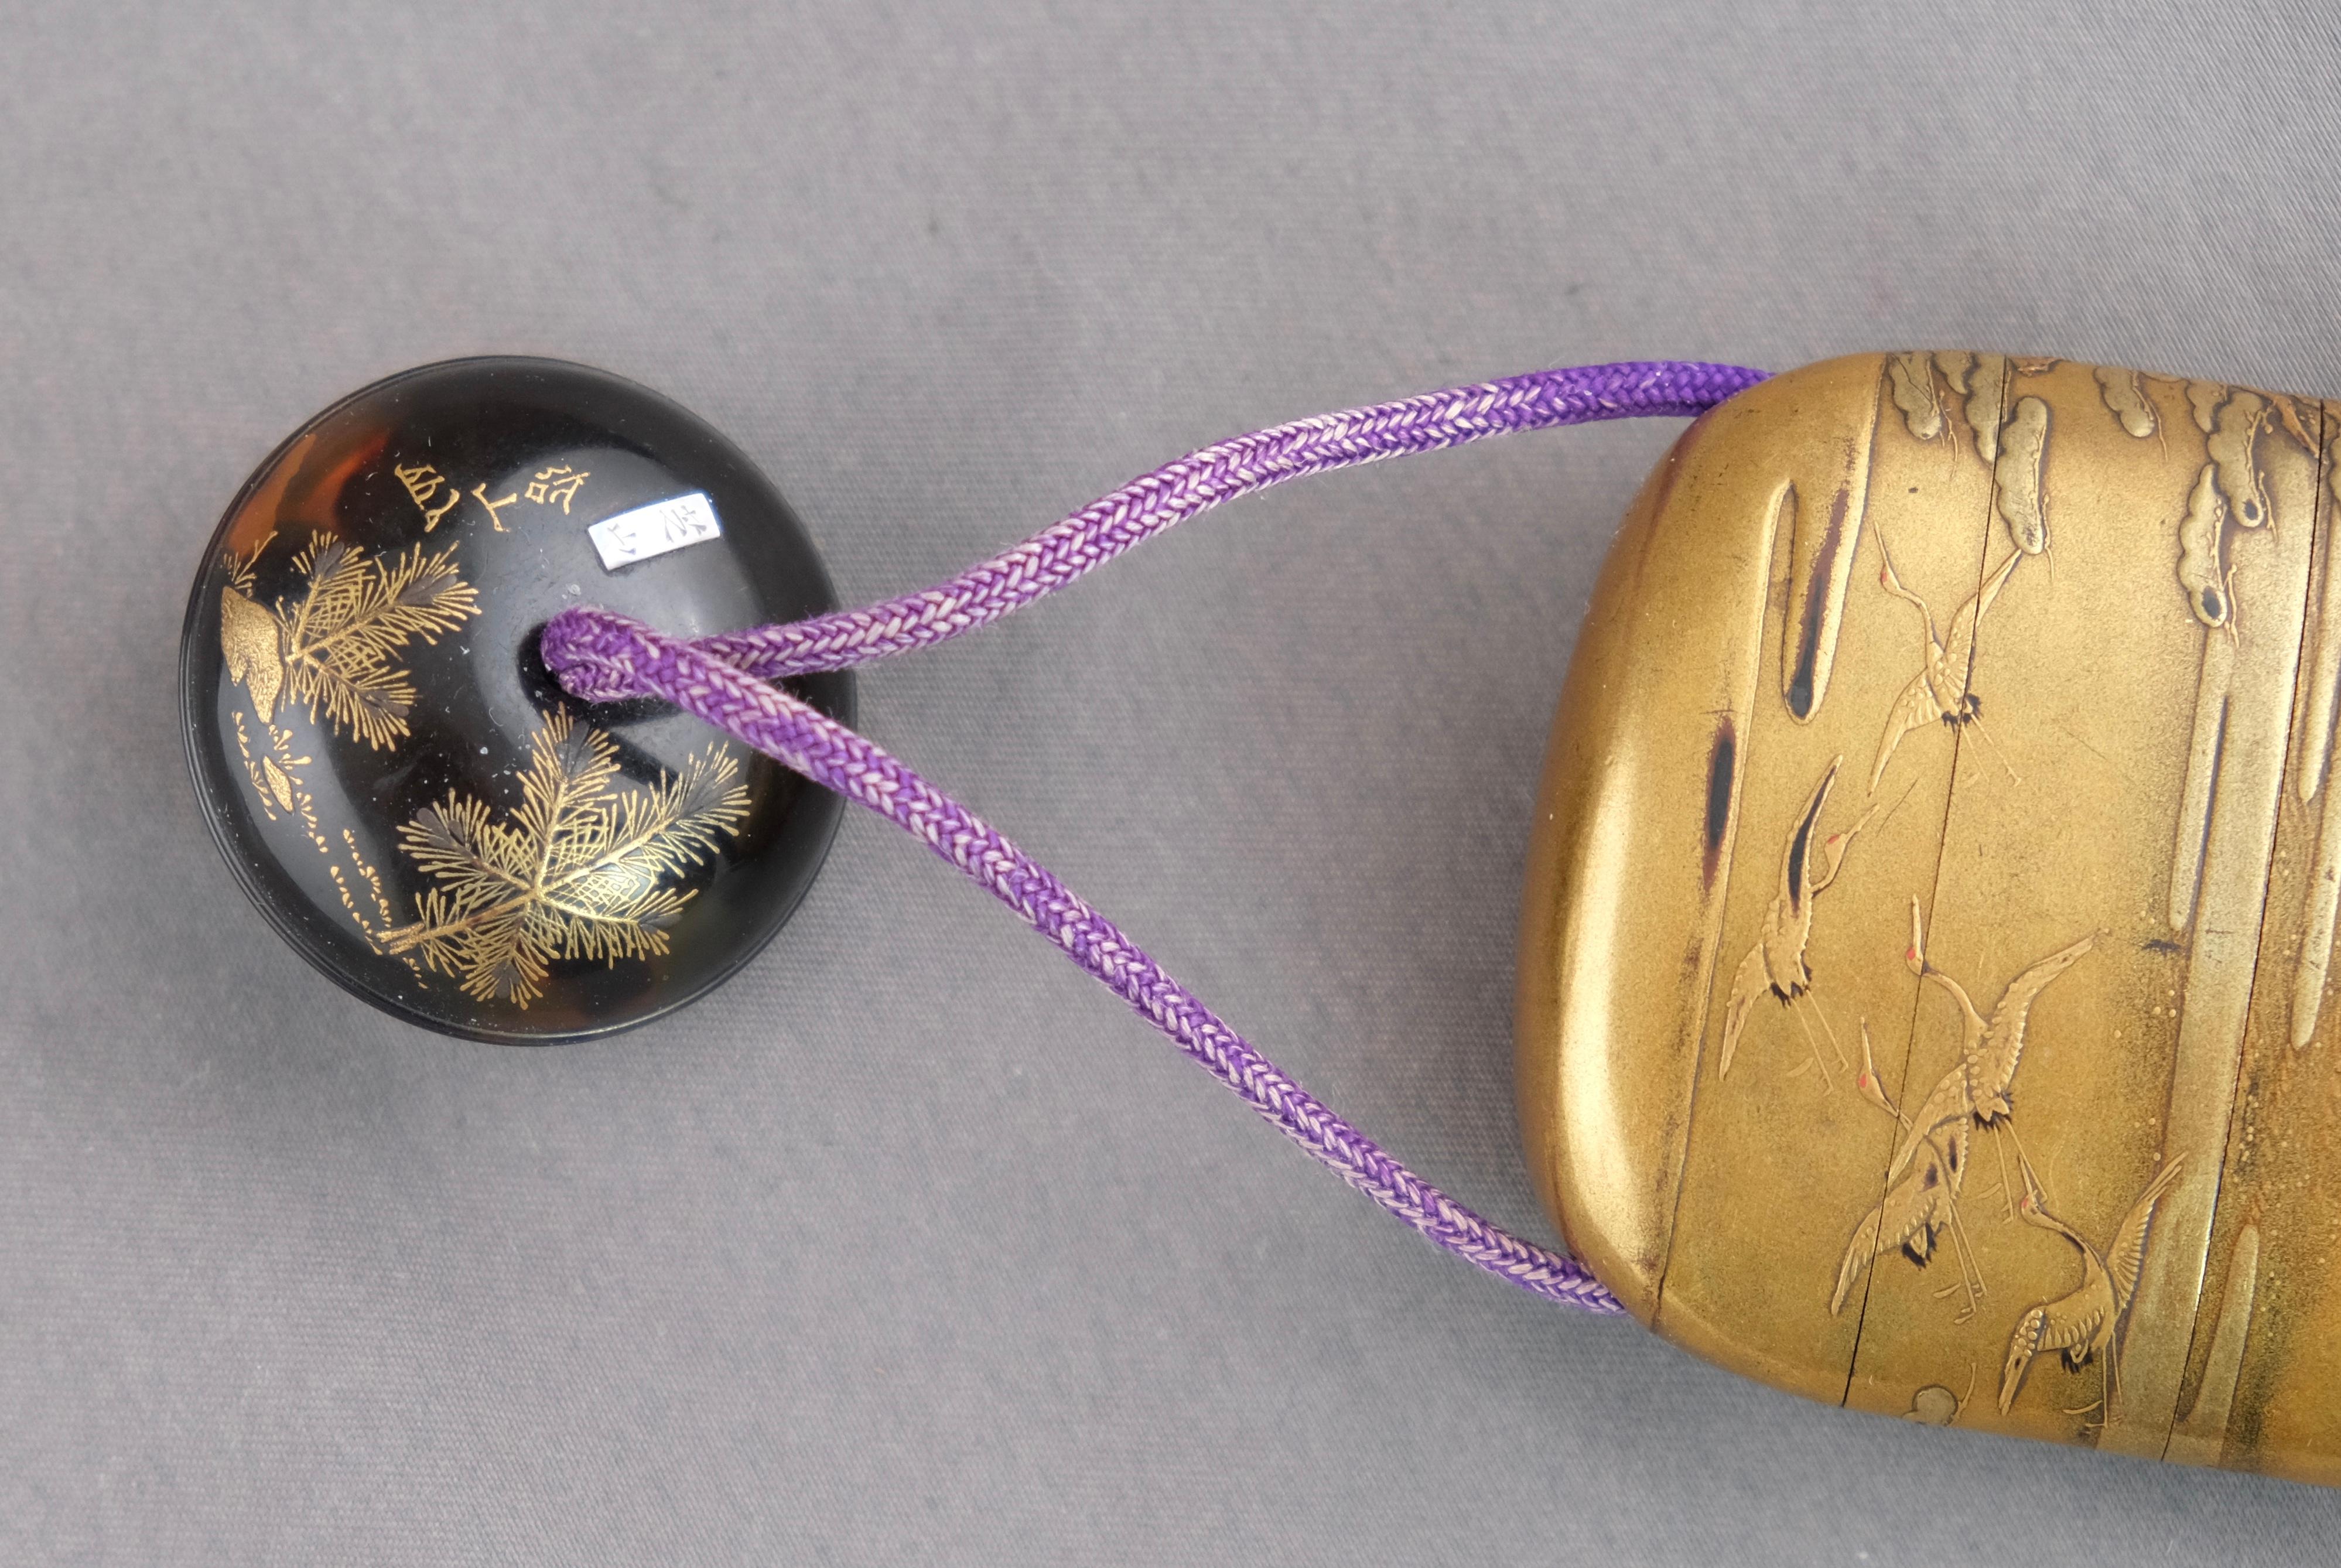 19th Century Signed Japanese Inro with a Signed Round Lacquer Netsuke